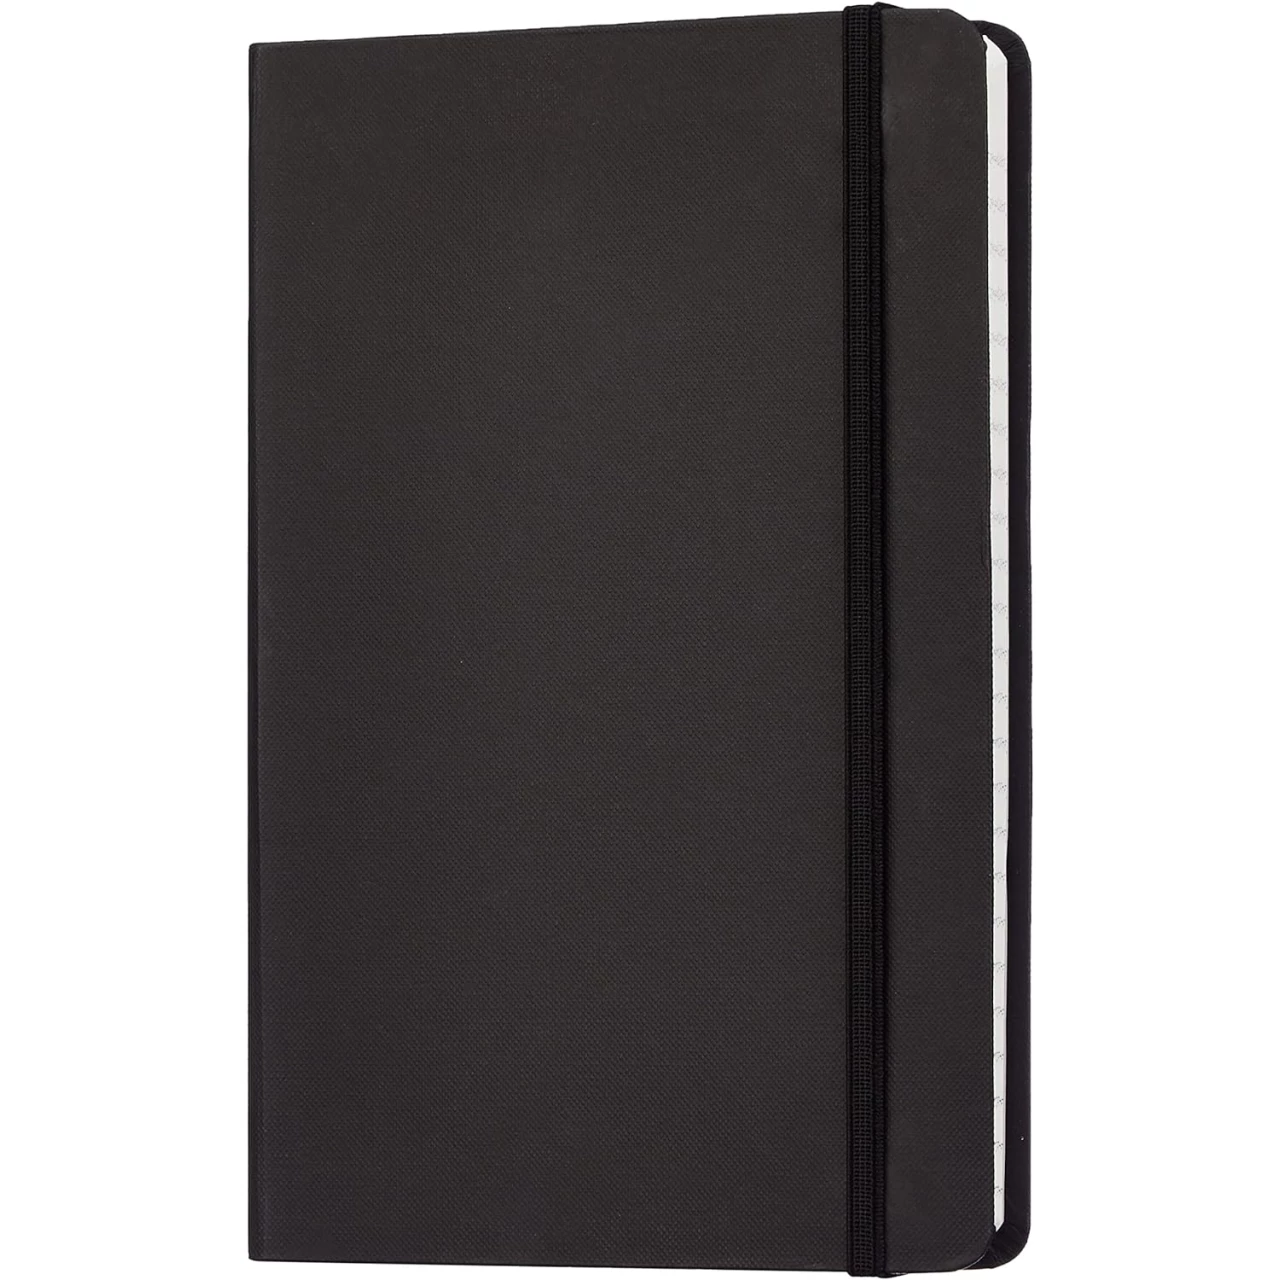 Amazon Basics Classic Notebook, Line Ruled, 240 Pages, Black, Hardcover, 5 x 8.25-Inch